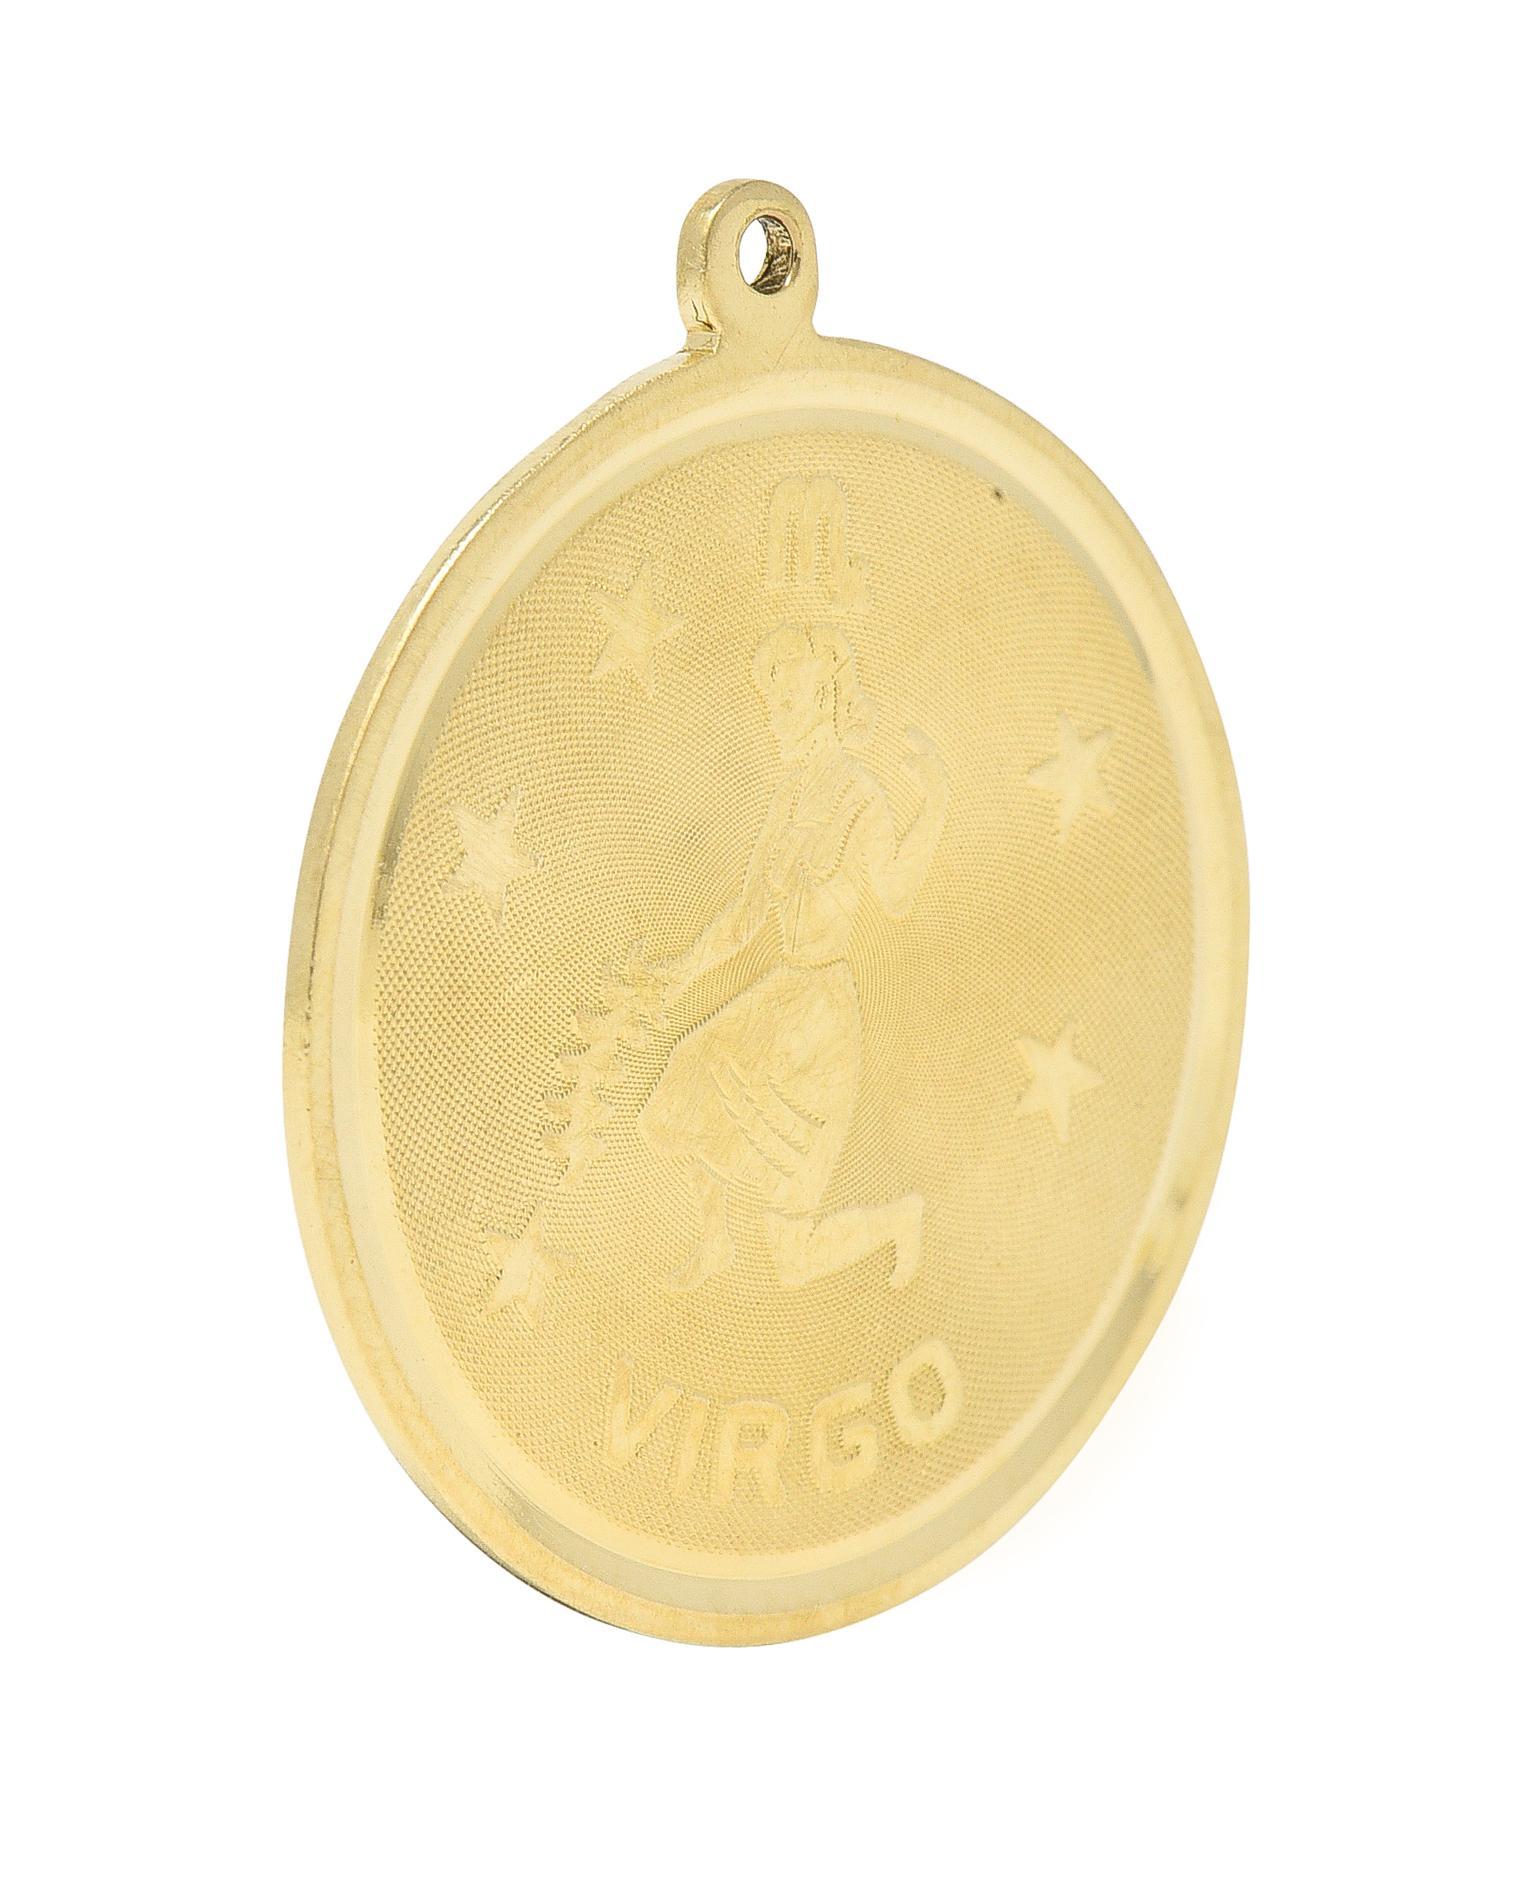 Designed as a round disk with high polished edges and a raised Virgo zodiac motif
With the astrological Virgo symbol, a woman holding wheat, stars, and inscribed 'VIRGO'
With a finely cross-hatch textured recess
Completed by pierced bale
Tested as